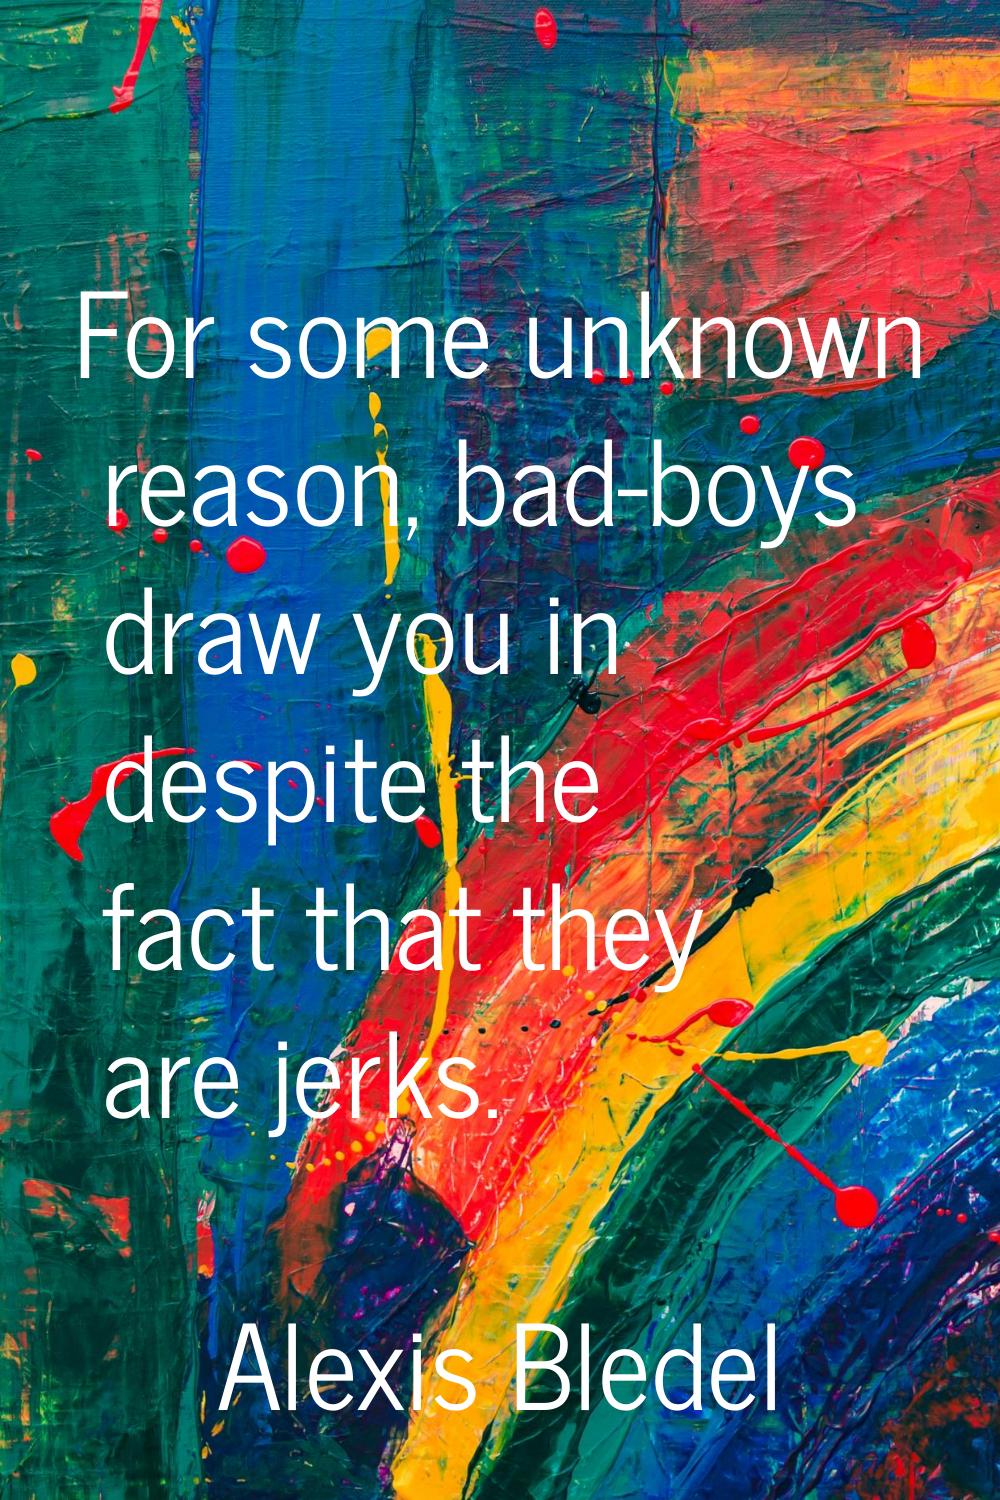 For some unknown reason, bad-boys draw you in despite the fact that they are jerks.